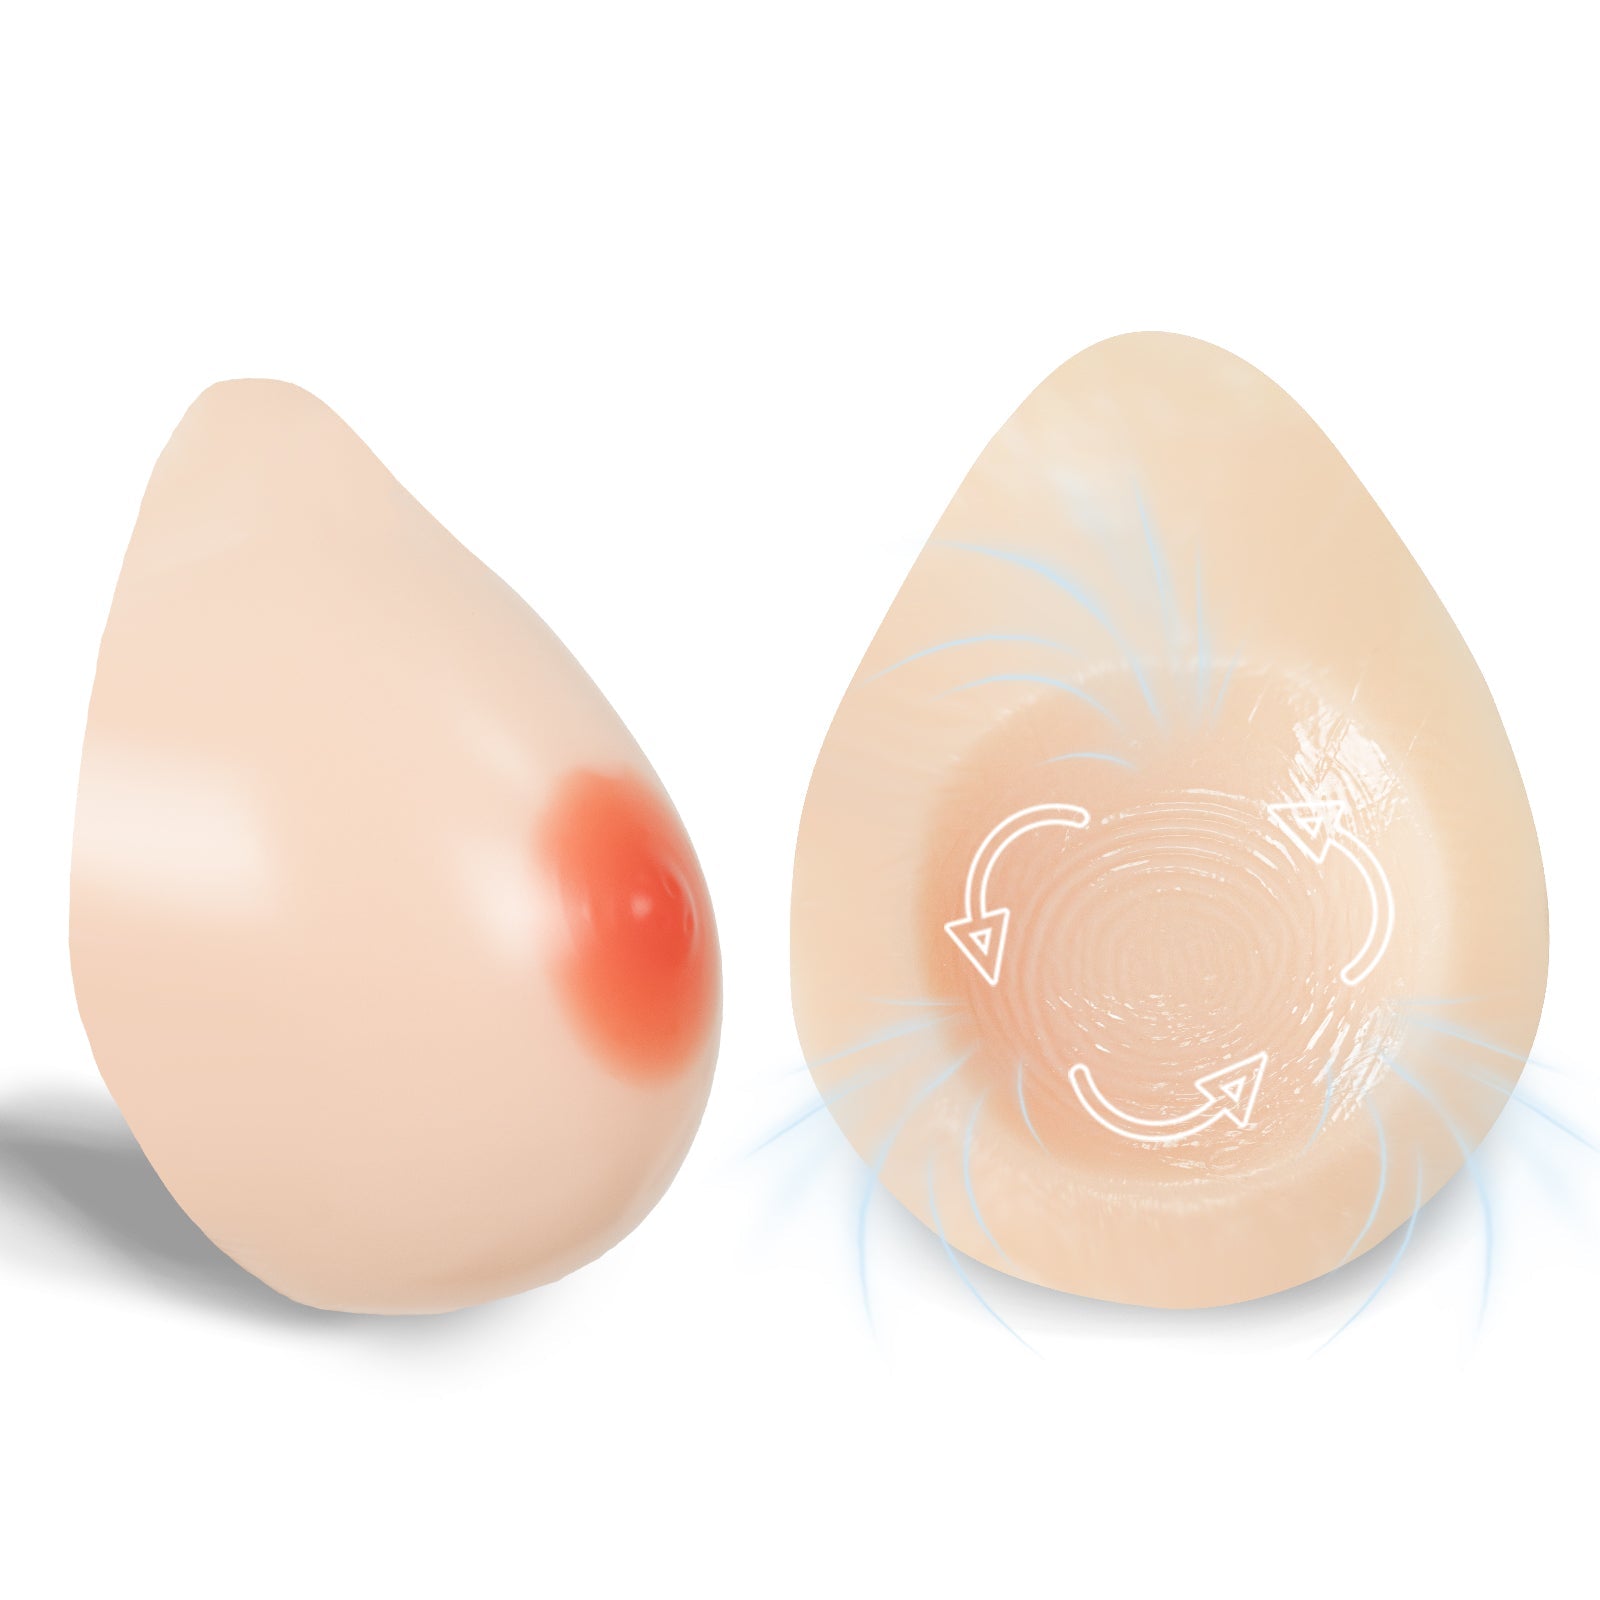 One Pair Adhesive Sticky Silicone Breast Forms for Mastectomy for Crossdresser